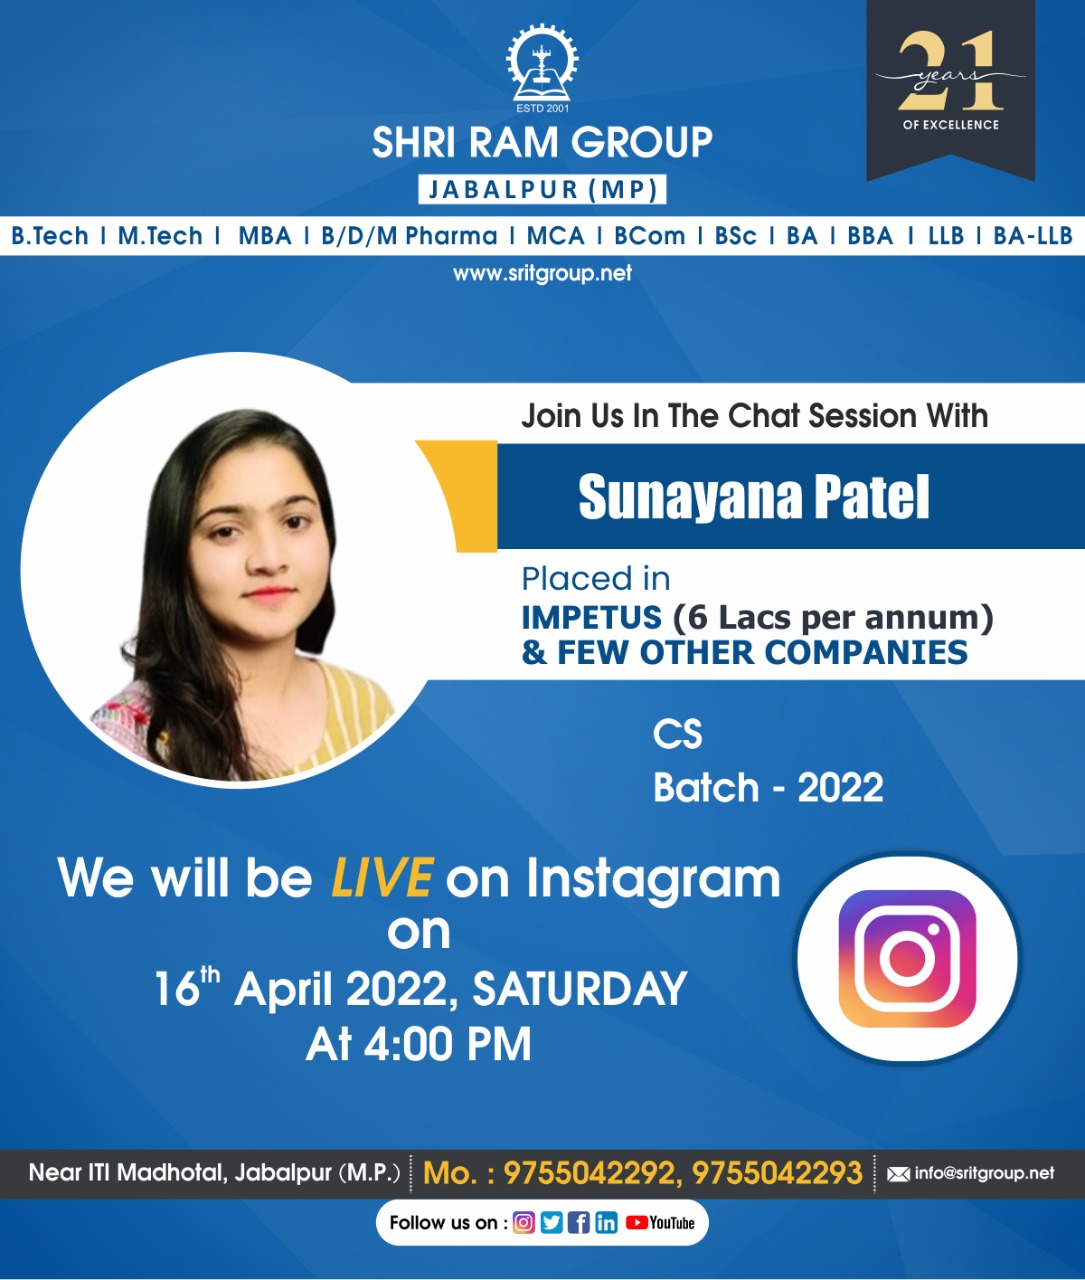 Join us to chat live with Sunayana Patel who got placed in Impetus and a few other companies.